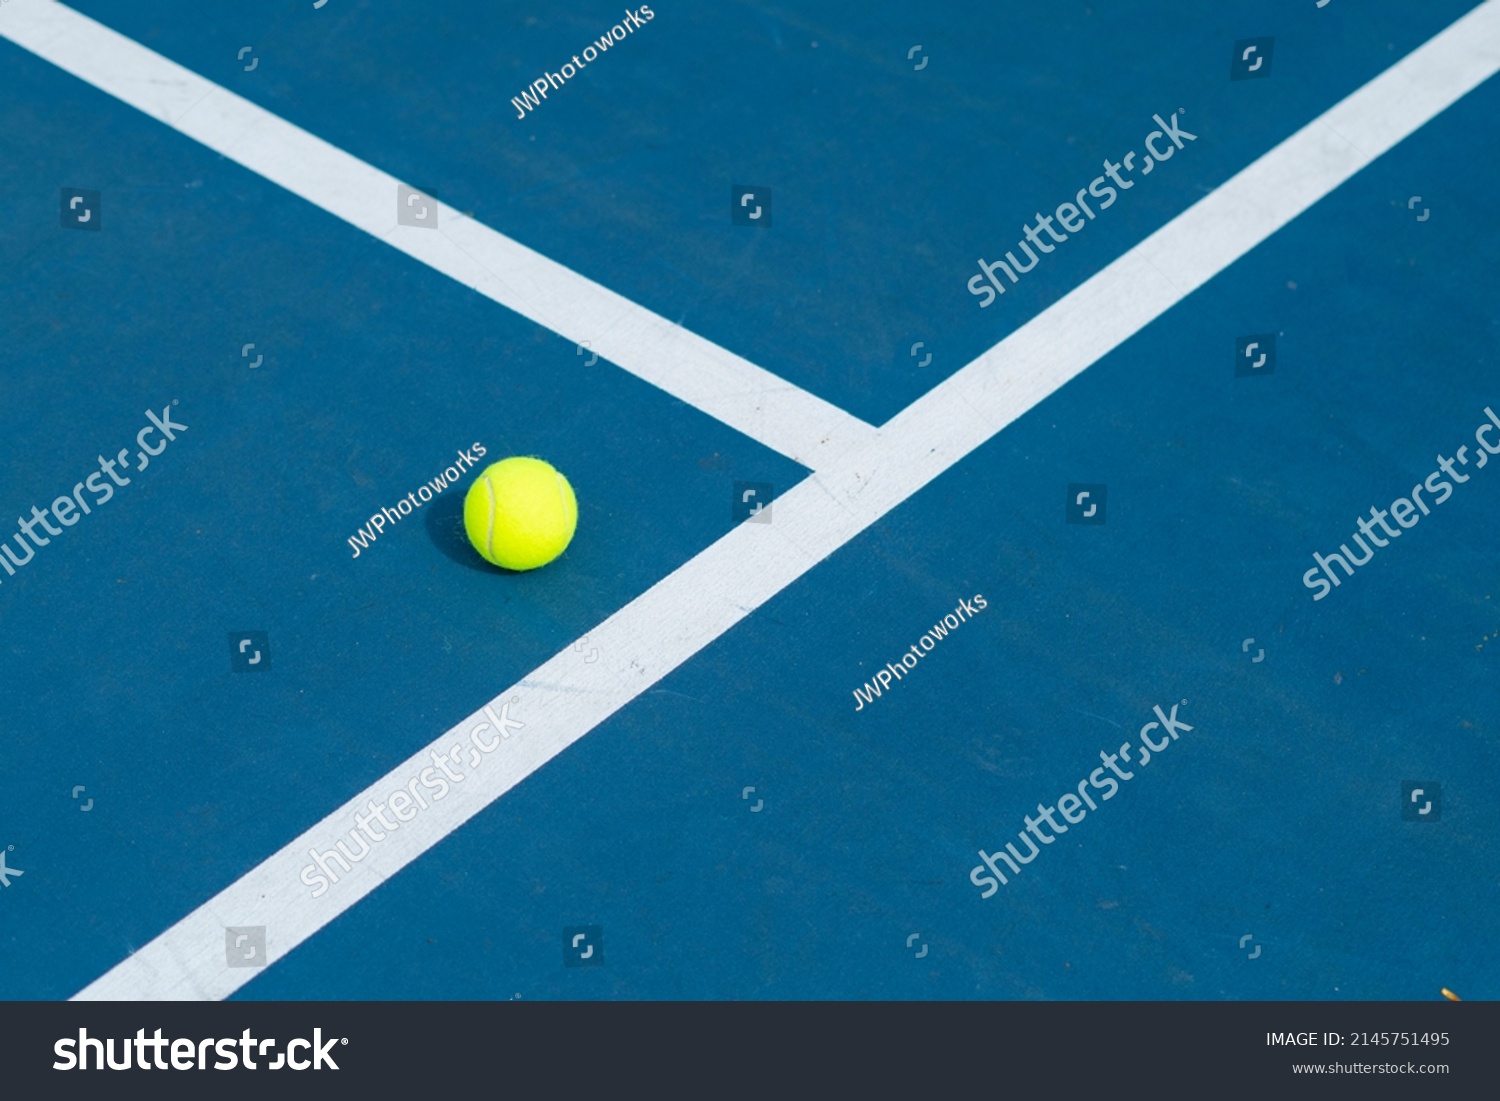 A Single Tennis Ball On a Tennis Court - Great Photo For Tennis or Sports Related Promotions #2145751495